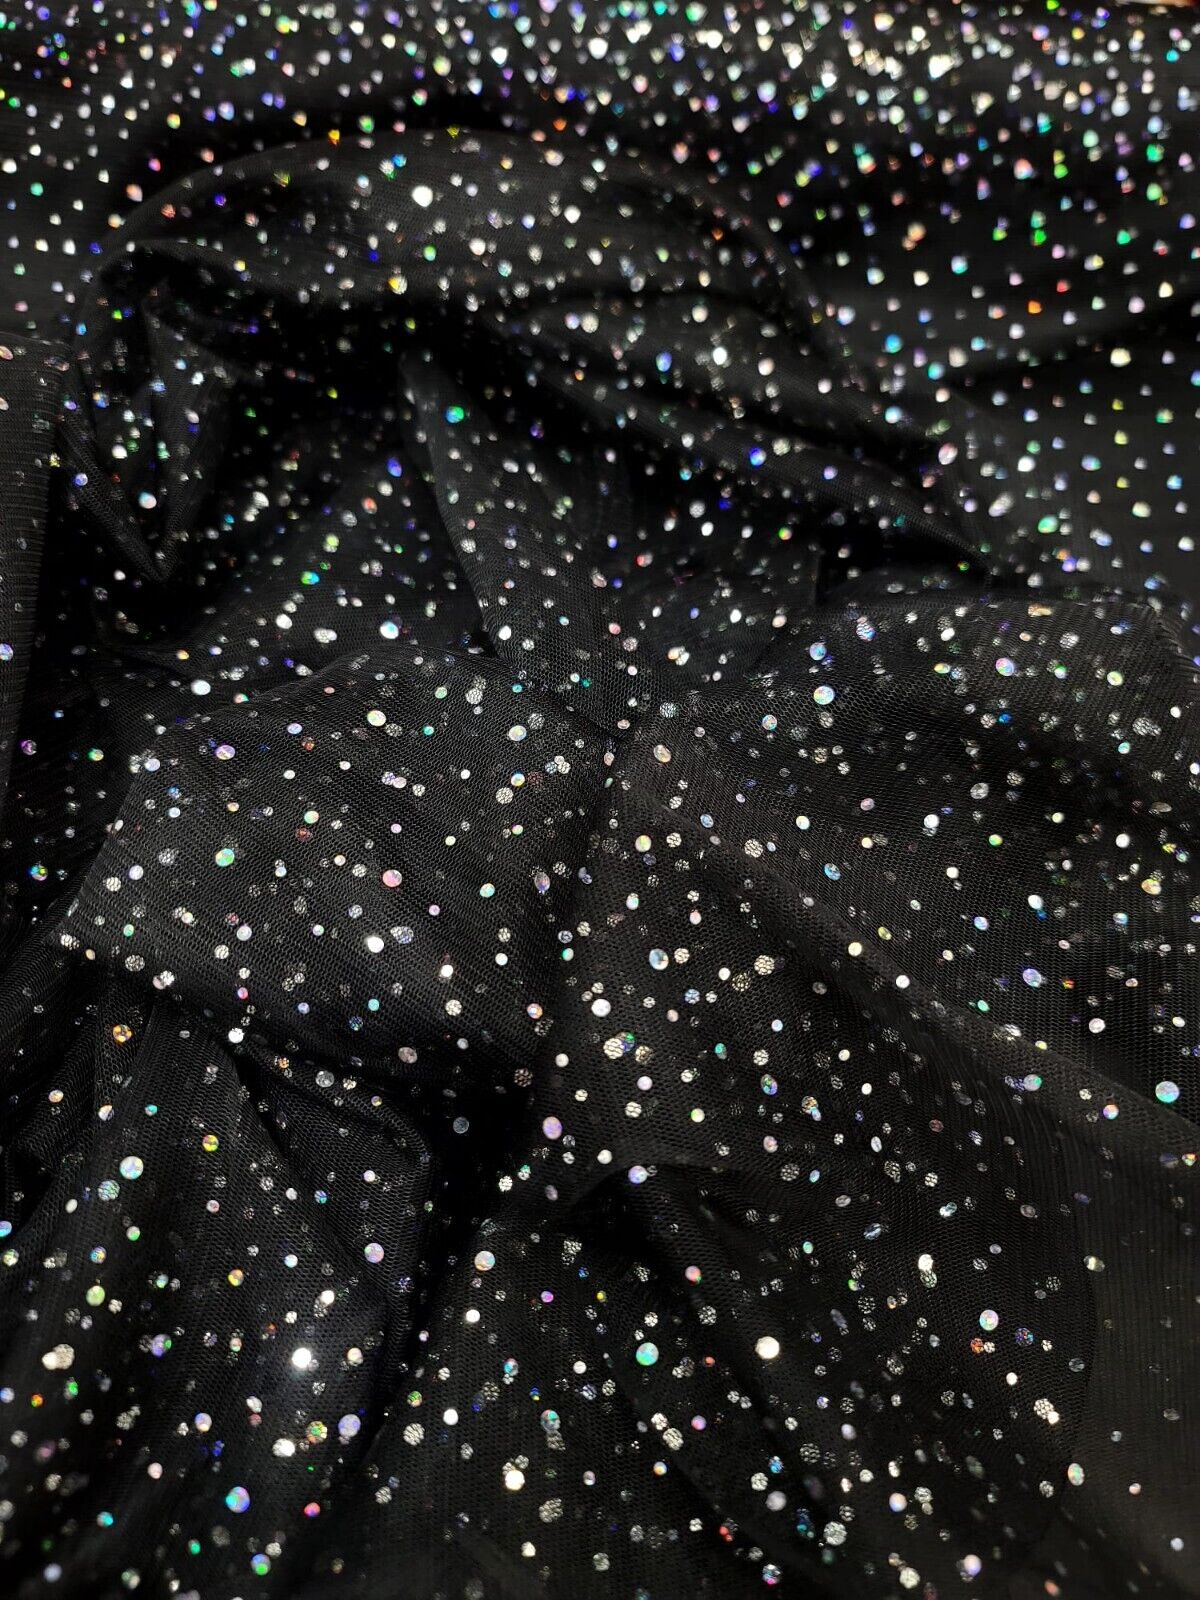 Black Stretch Mesh Iridescent Sequins Fabric Sold By The Yard Quinceañera Prom